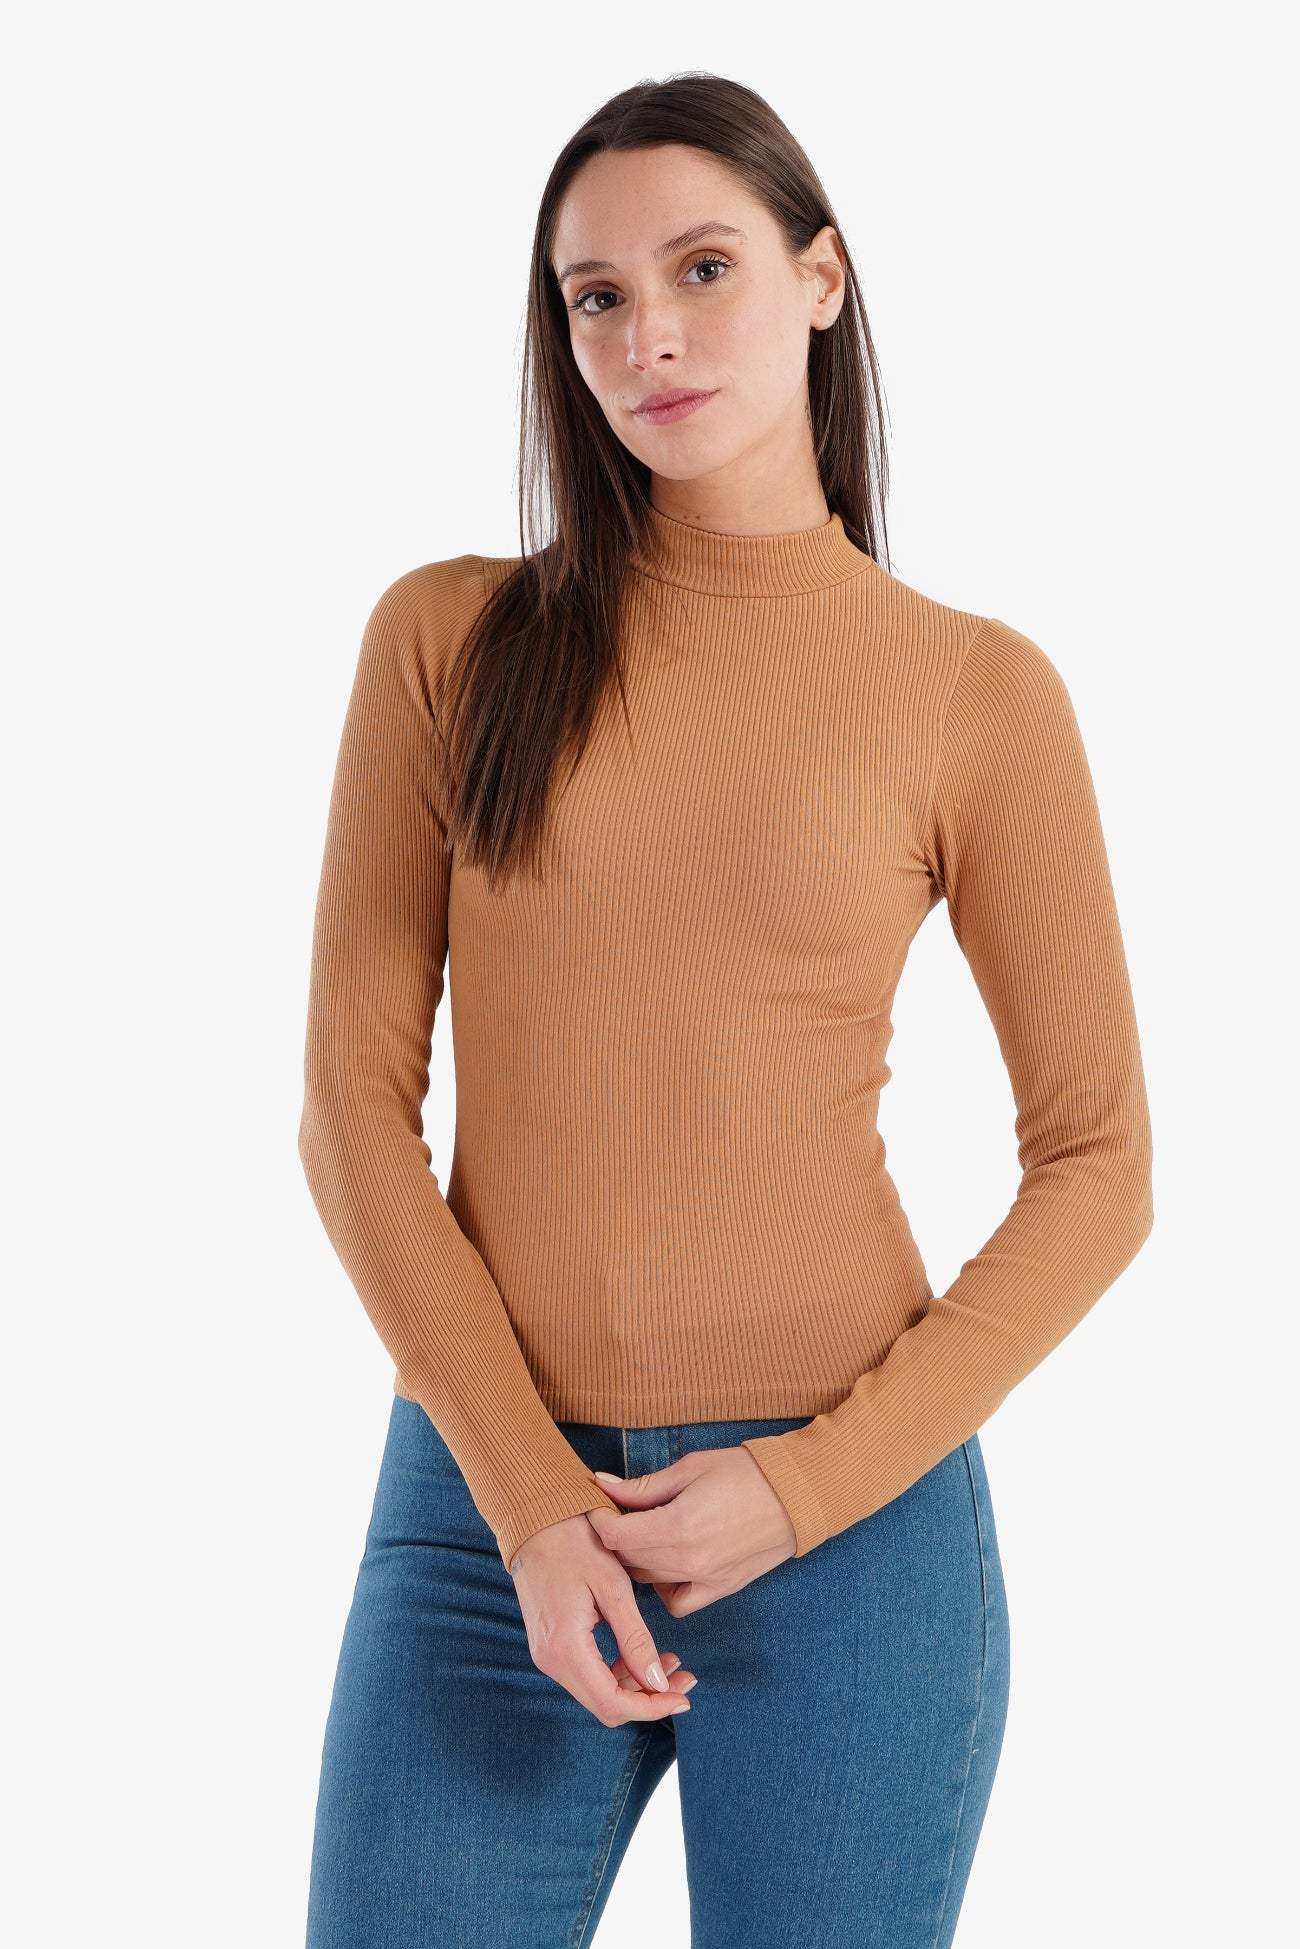 Top with Thumbhole Cuffs - Carina - كارينا